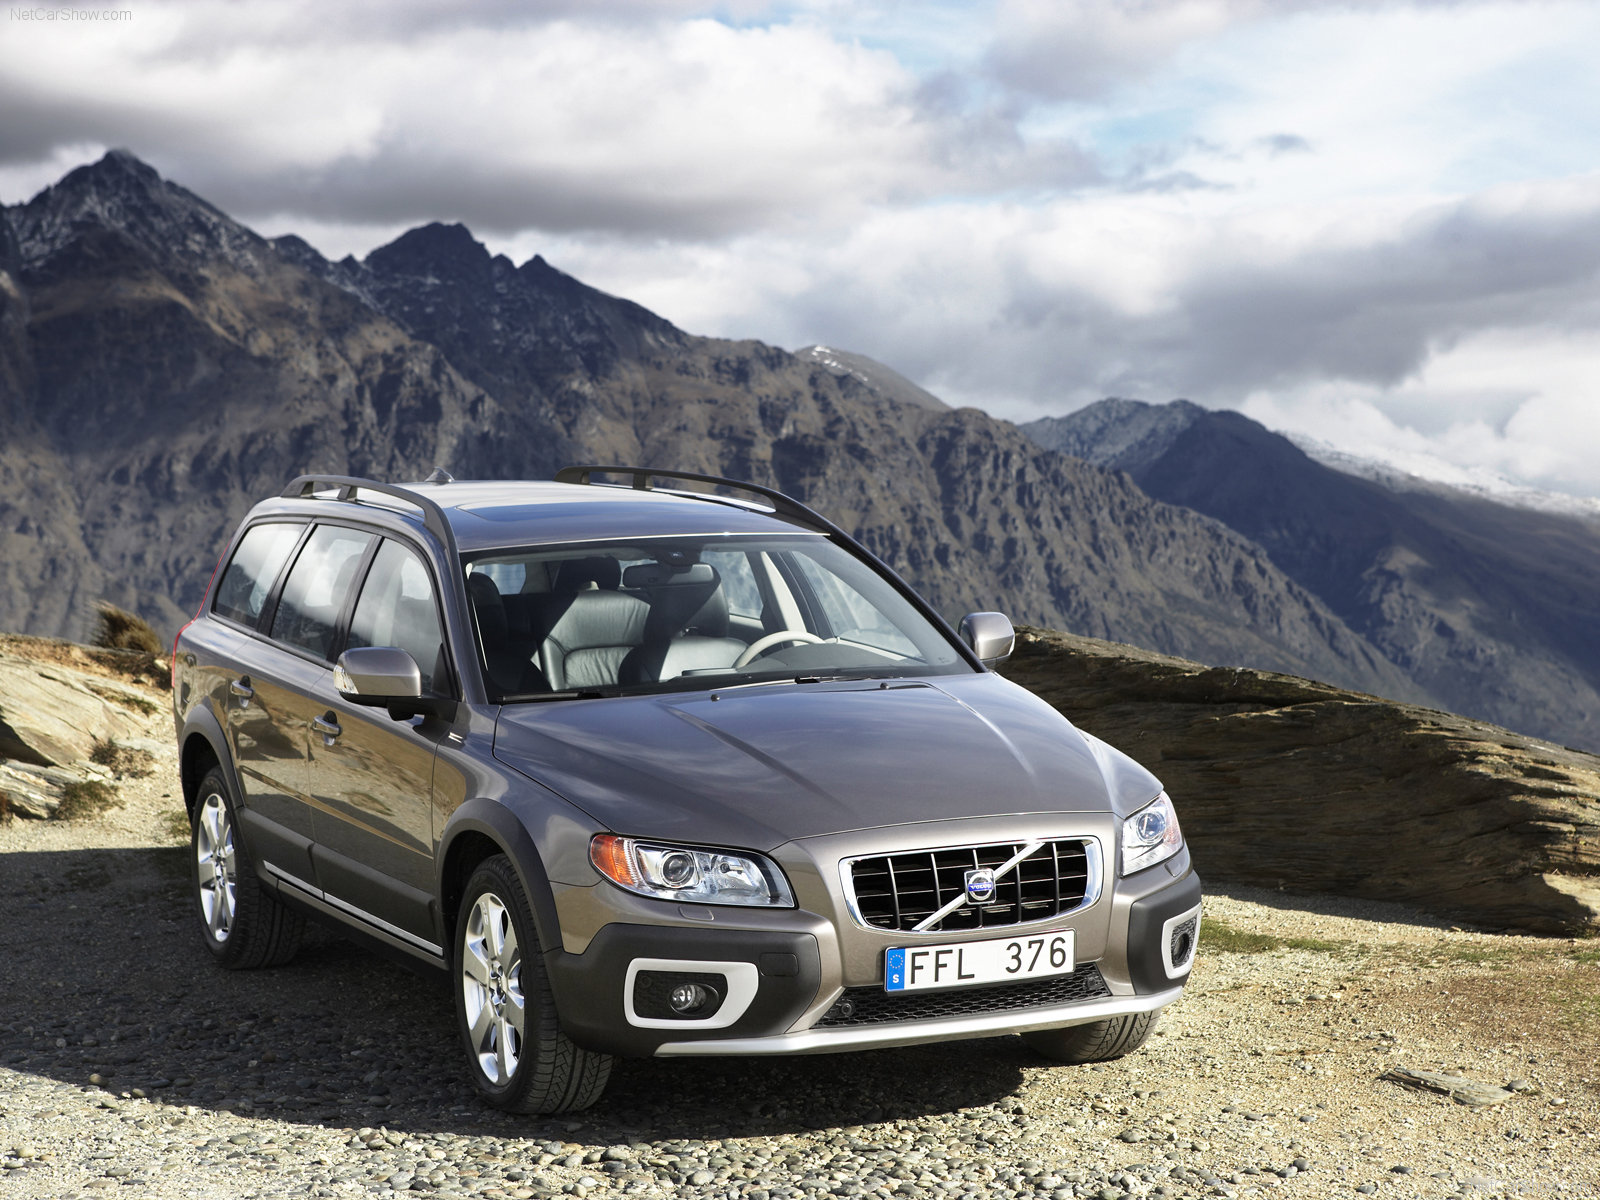 i.e. Volvo XC70 and S80 are circulating in the United States (U.S.).